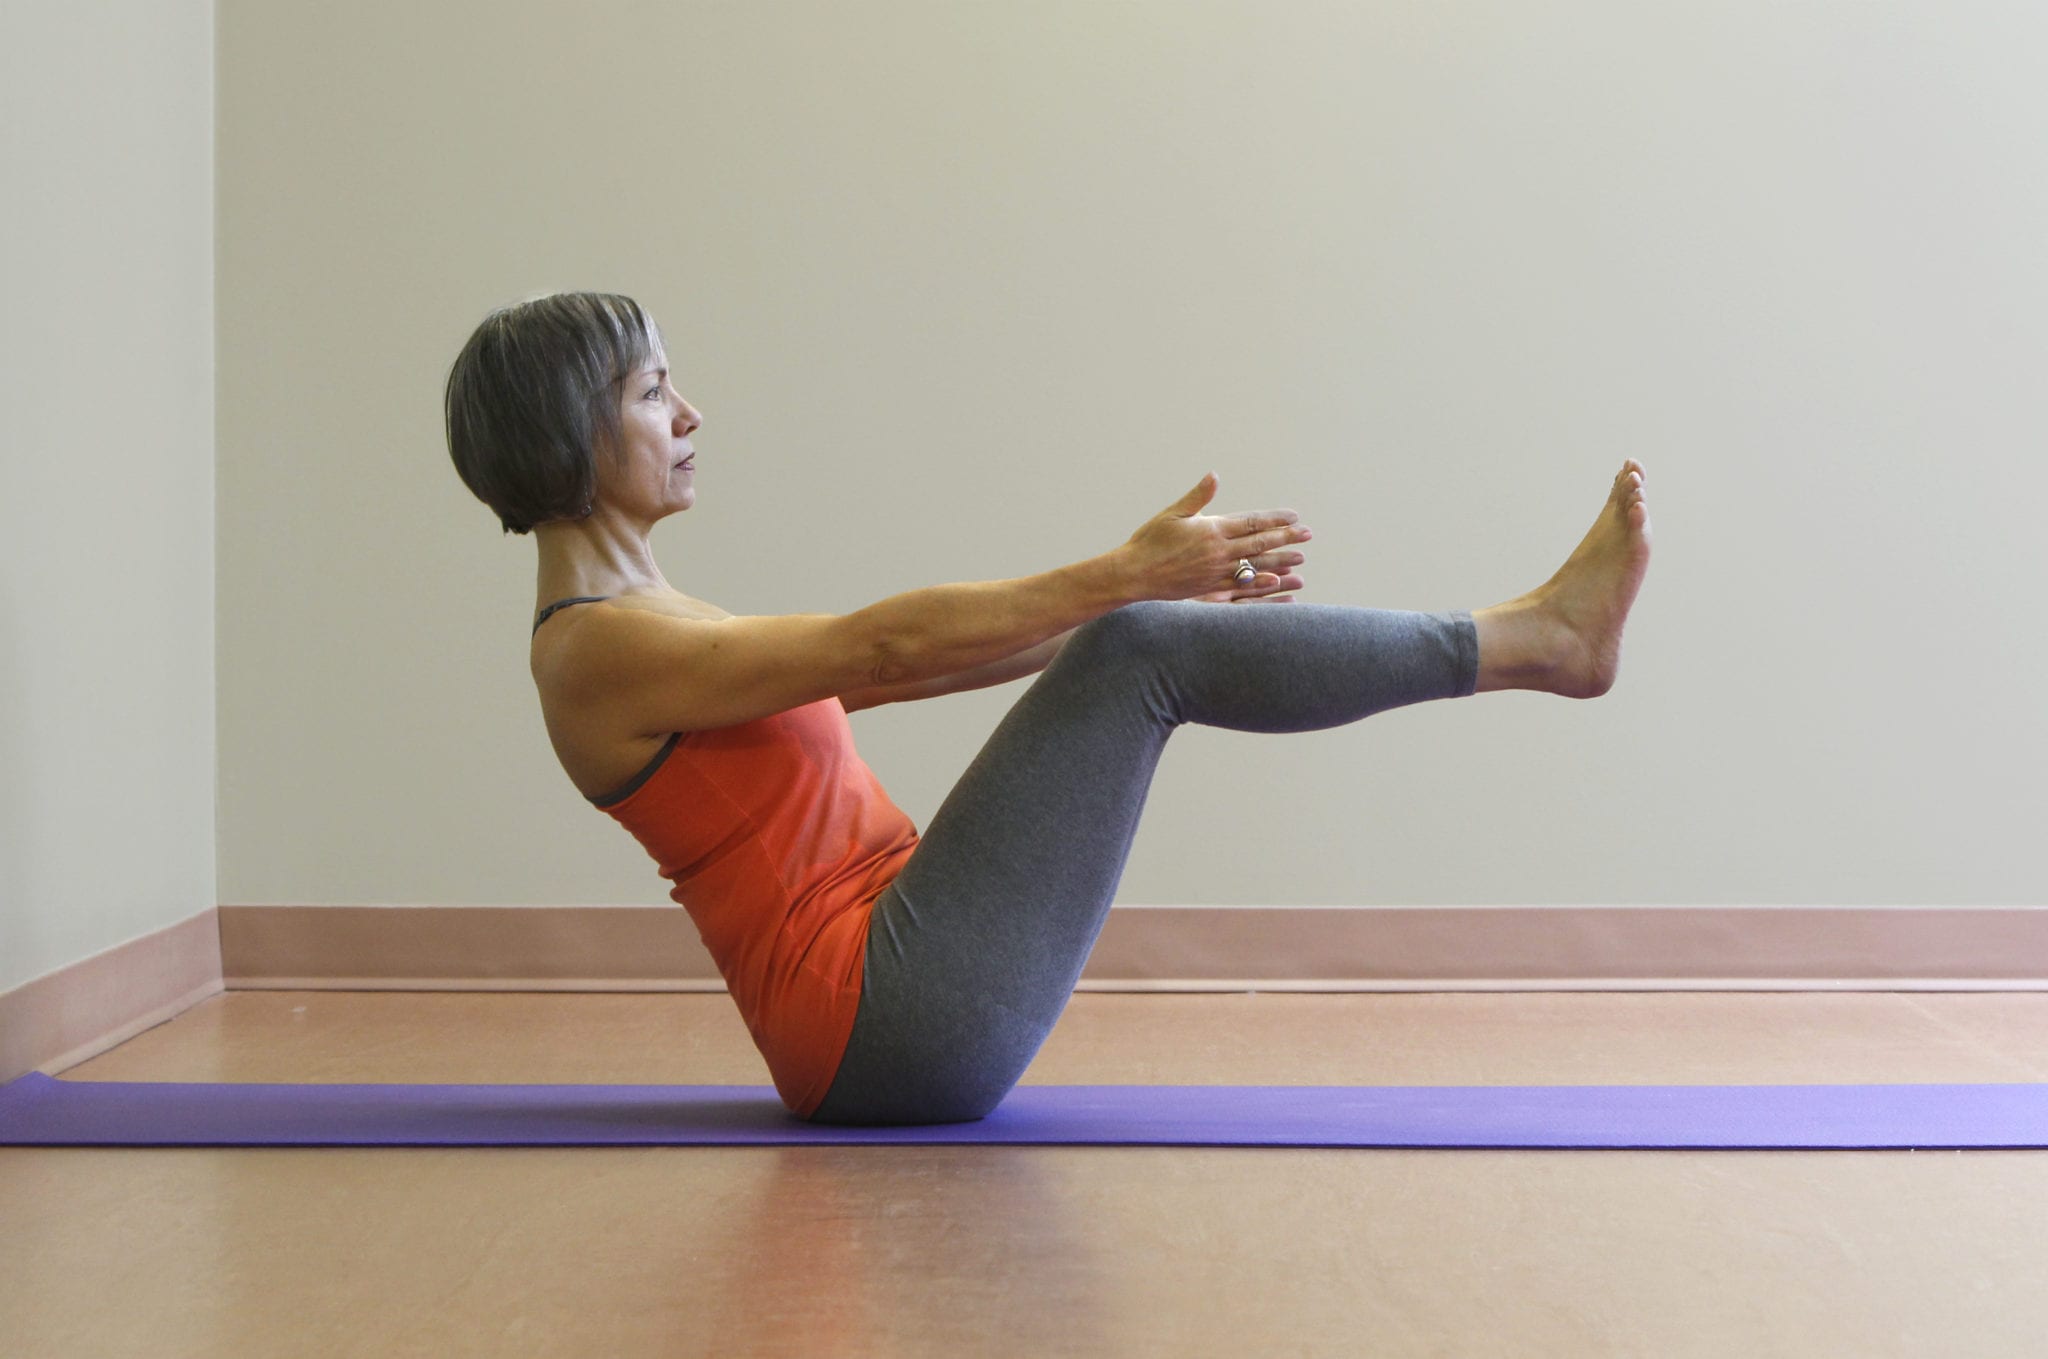 4 Yoga Poses To Give Your Spine A Complete Stretch | mindbodygreen